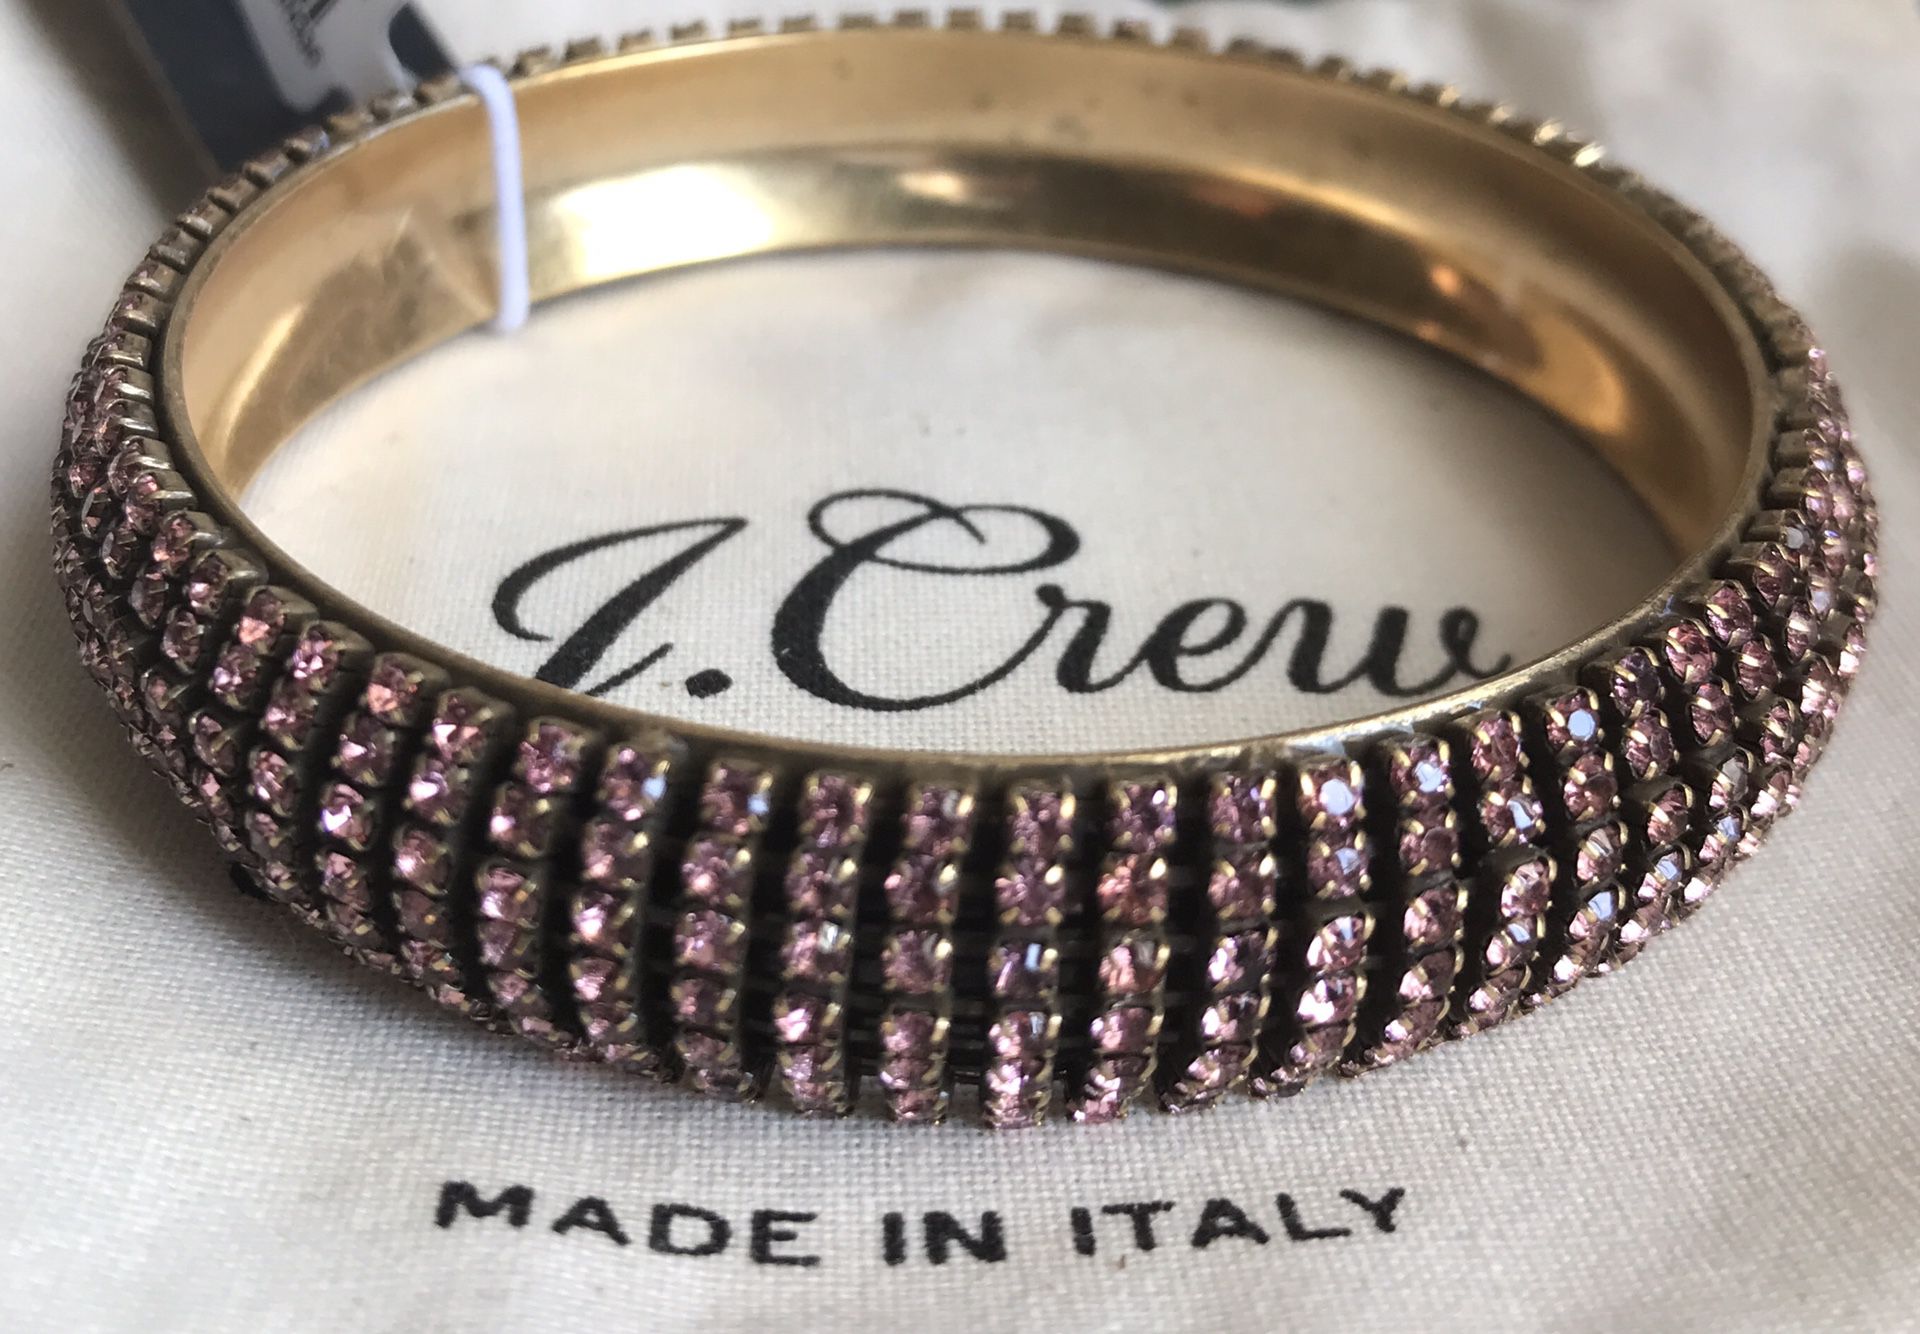 (NEW) (2 SIZES AVAILABLE) WOMEN’S J.CREW CLASSIC PINK CRYSTAL STUDDED BANGLE BRACELET - SIZES: SMALL/MEDIUM AND MEDIUM/LARGE (MSRP: $68 EACH)